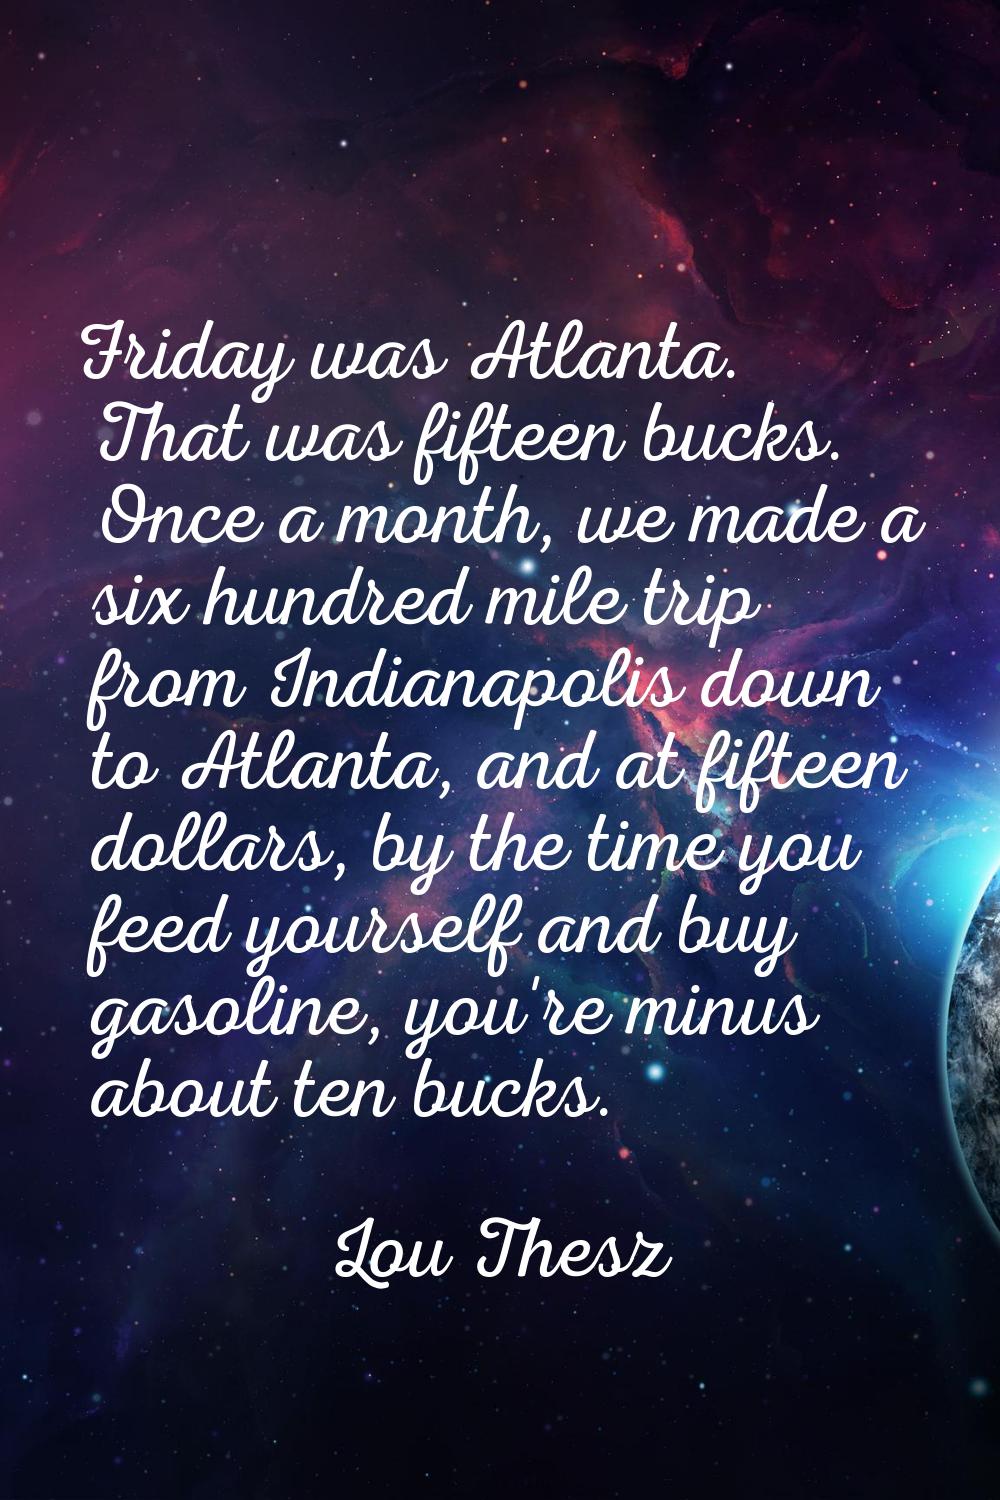 Friday was Atlanta. That was fifteen bucks. Once a month, we made a six hundred mile trip from Indi